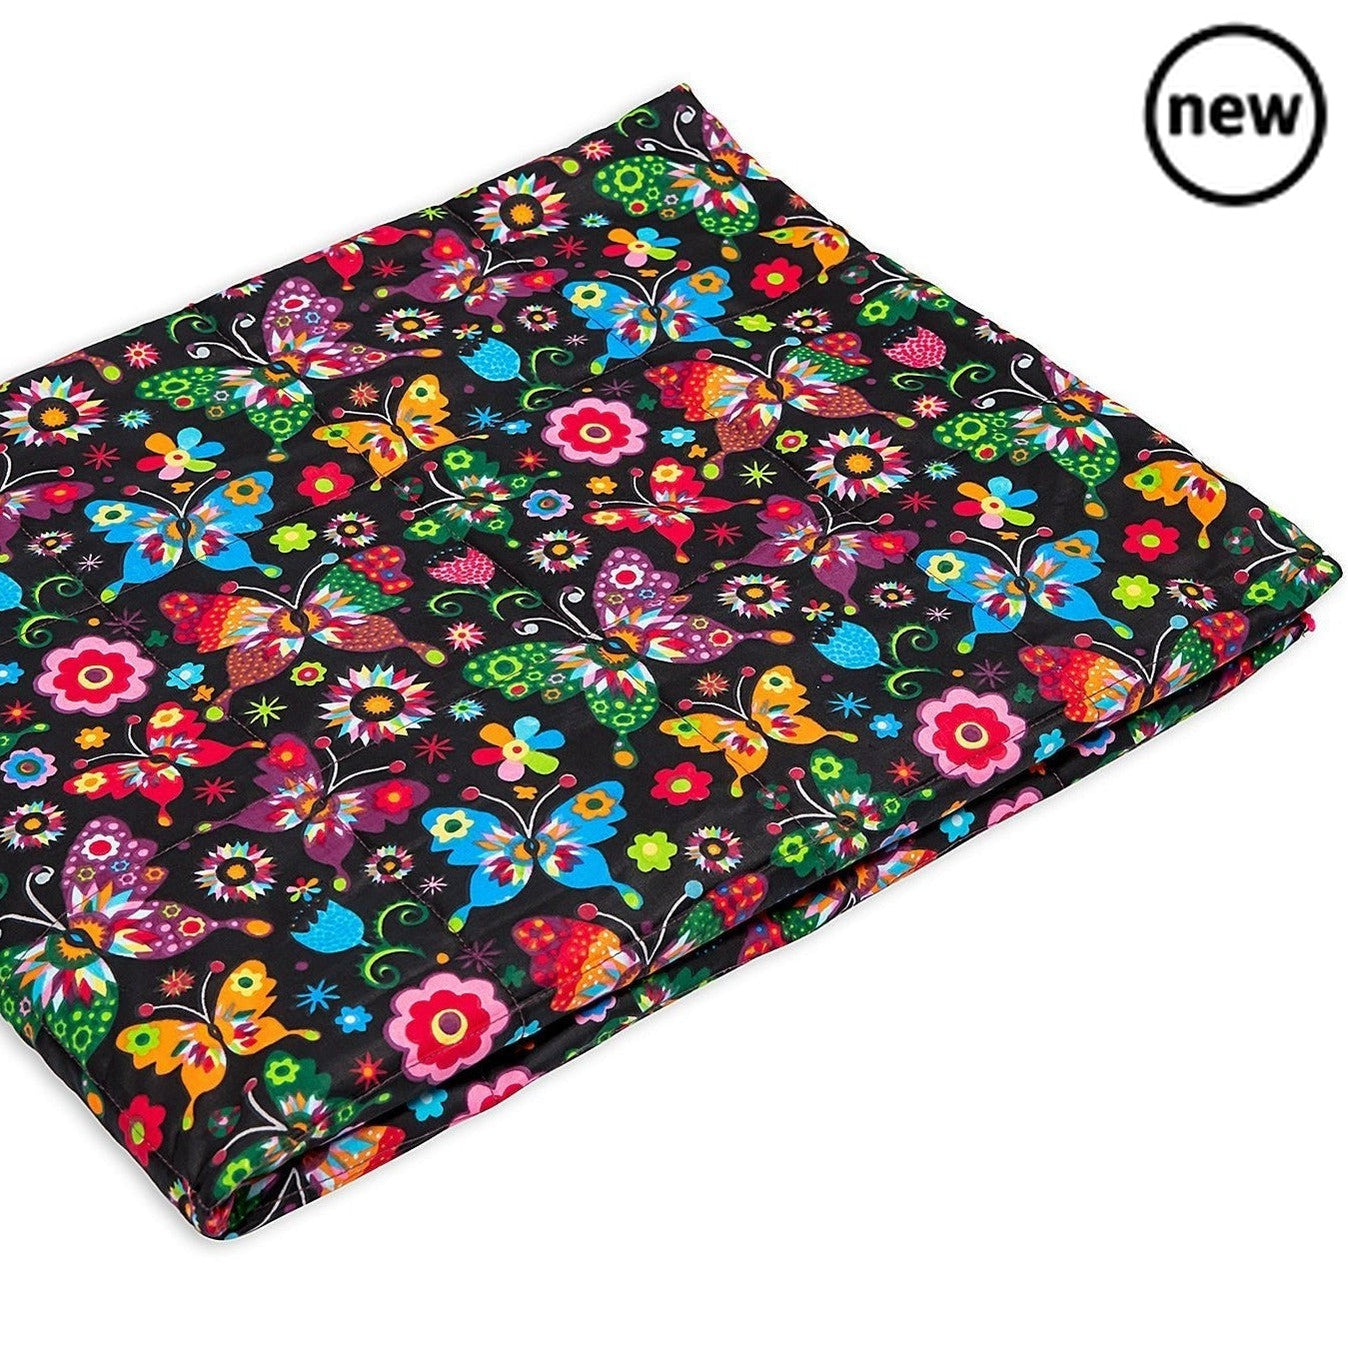 Butterflies Weighted Blanket, Introducing the Butterflies Weighted Blanket – where comfort meets individuality. Crafted from 100% butterfly cotton print, this weighted blanket is suitable for all age groups and entirely handmade from start to finish. With customizable options for size, weight, filling, and backing fabric, you can create a fully personalized blanket that suits your unique preferences.Key Features: Each Butterflies Weighted Blanket is meticulously crafted by hand, ensuring attention to detail